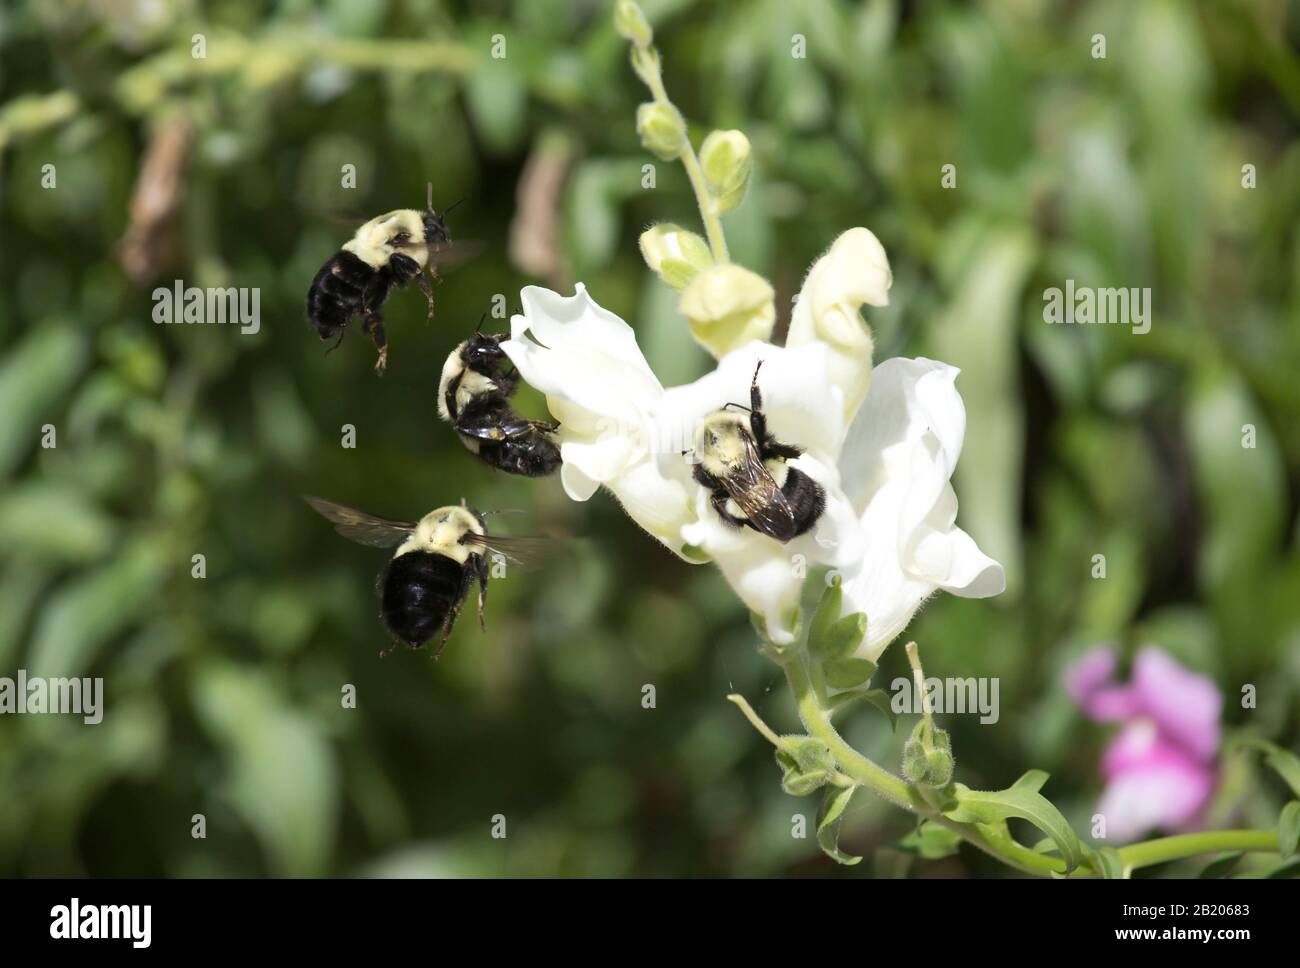 Bumblebee Collecting Pollen from Snapdragon Flowers in Summer Stock Photo